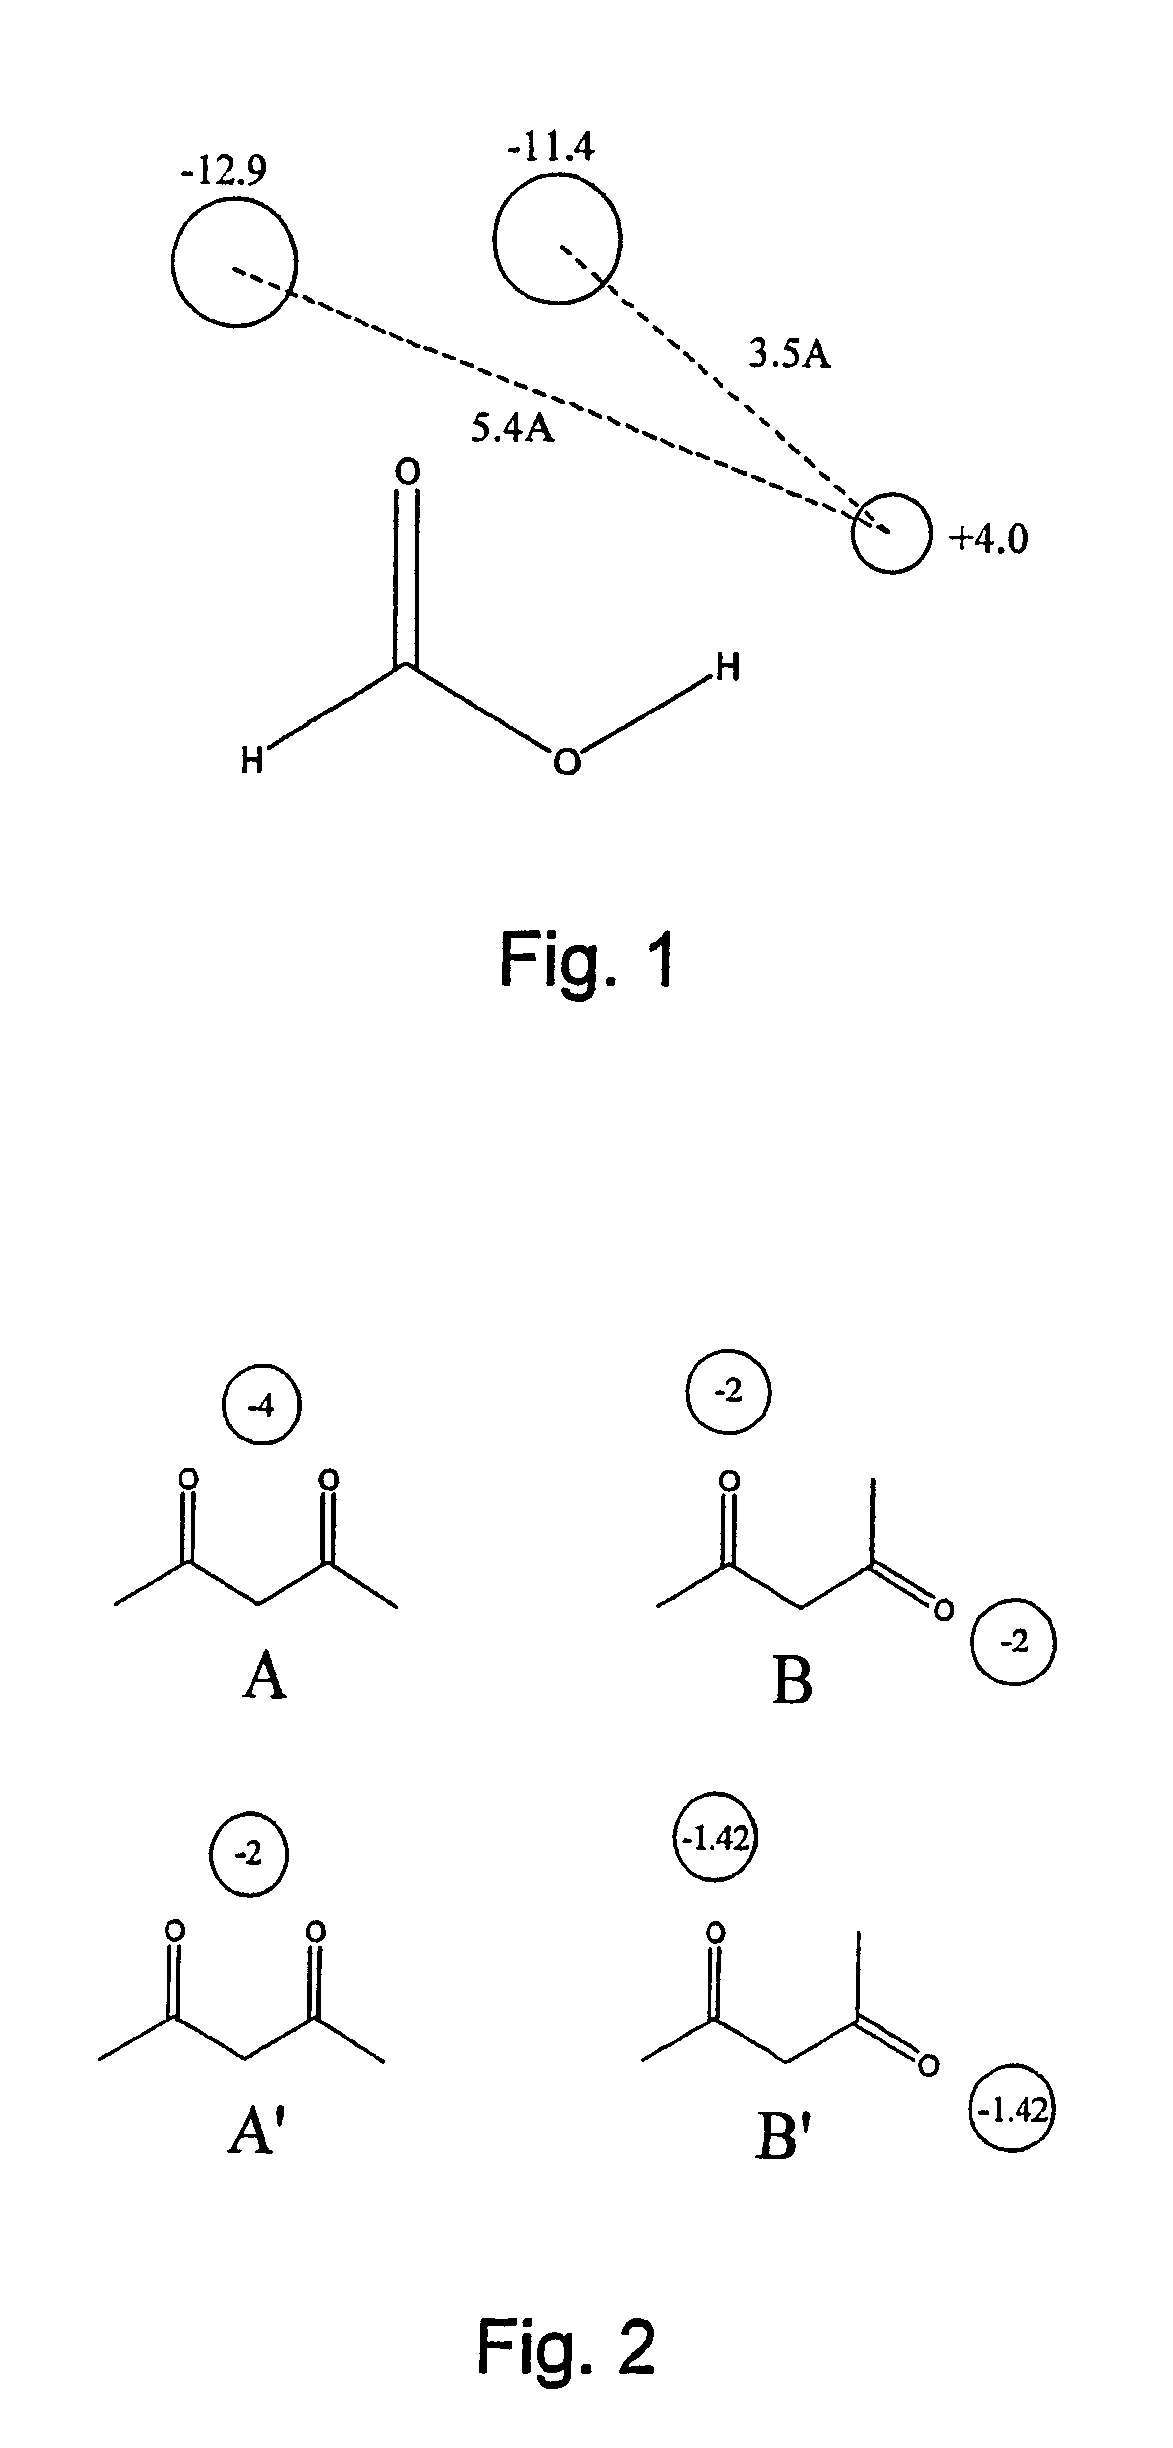 Comparison of molecules using field points